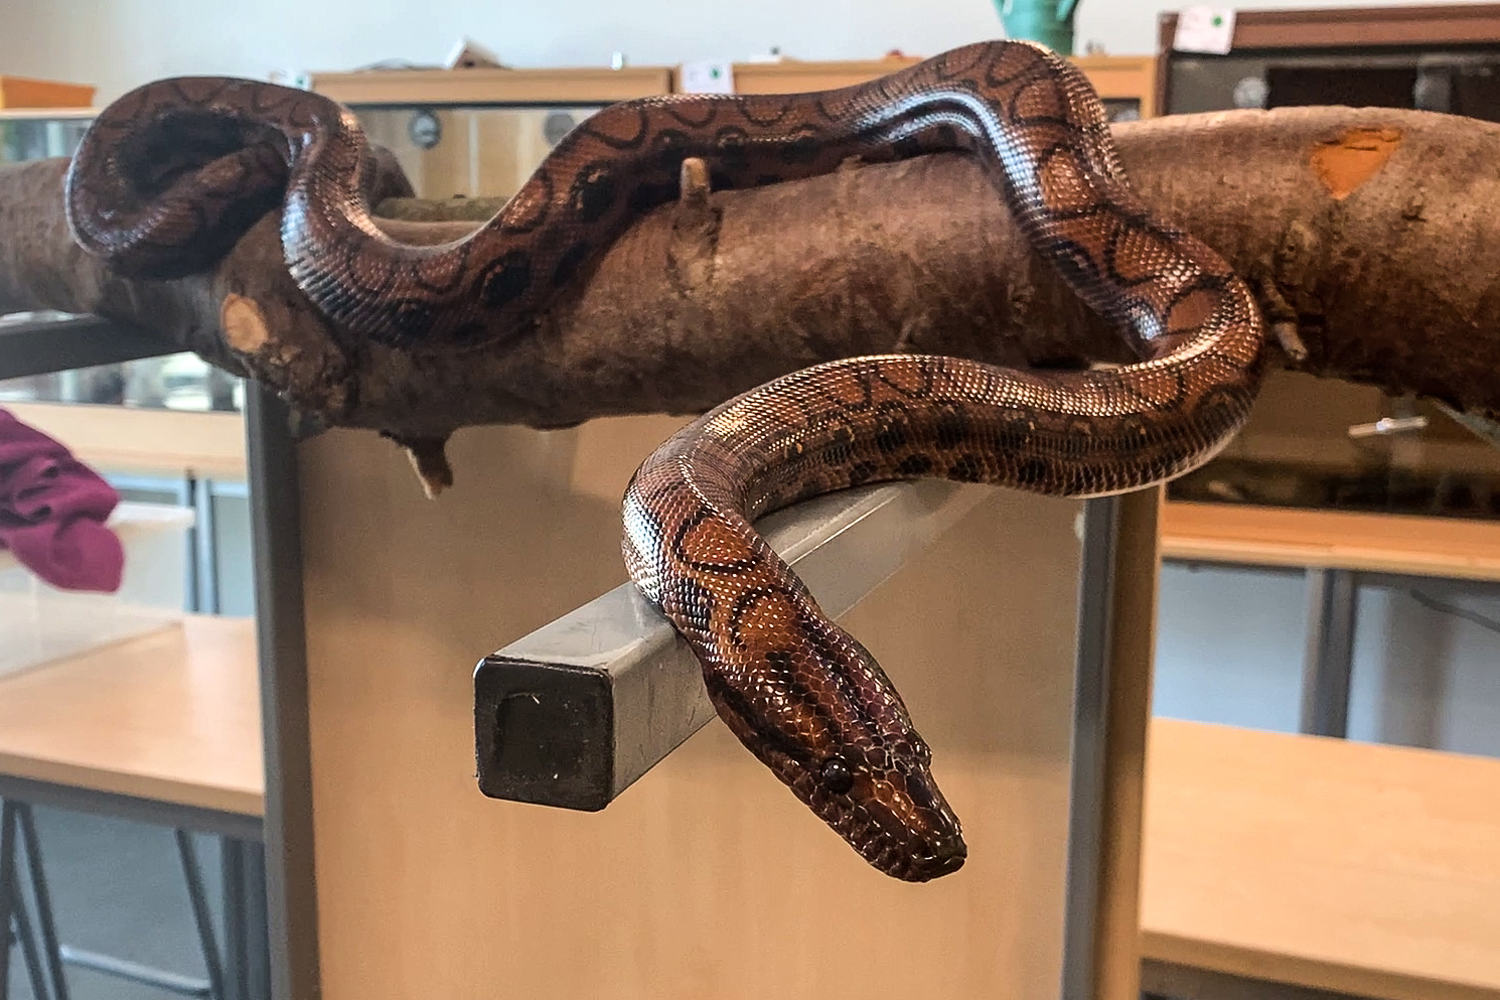 Boa constrictor gives birth to 14 baby snakes after living alone for nearly a decade